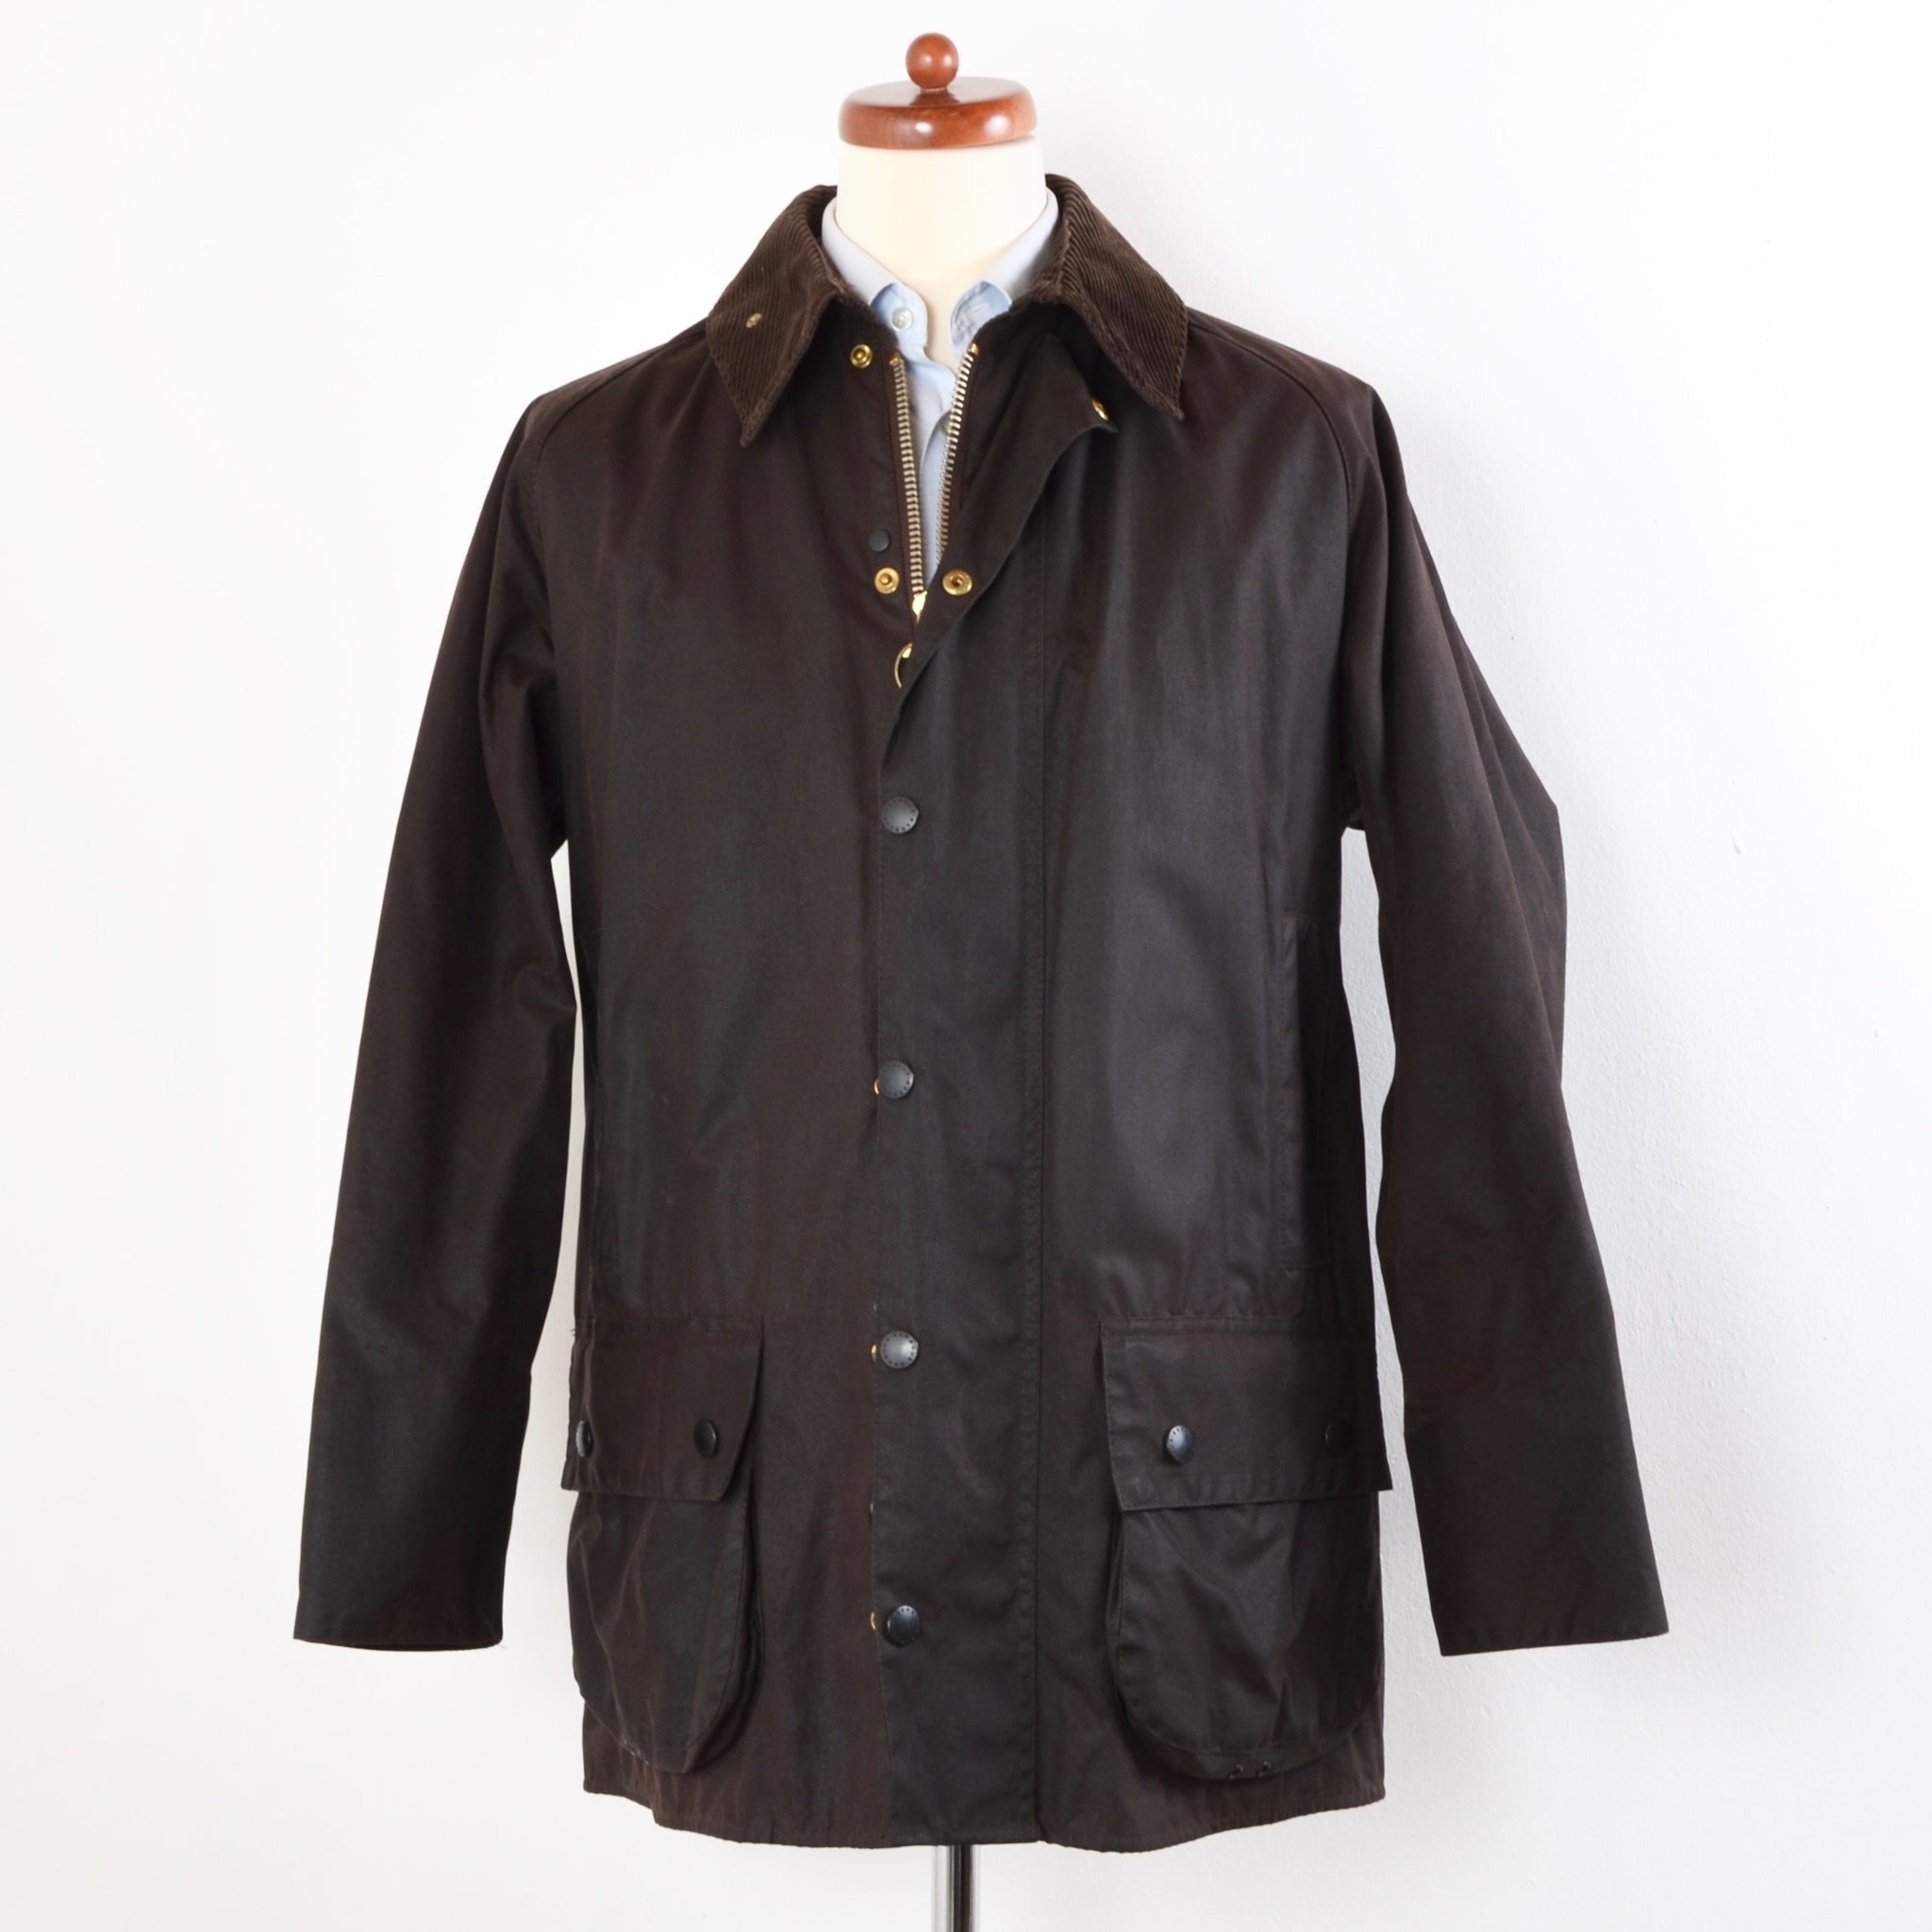 Barbour Beaufort Waxed Jacket A190 Size 